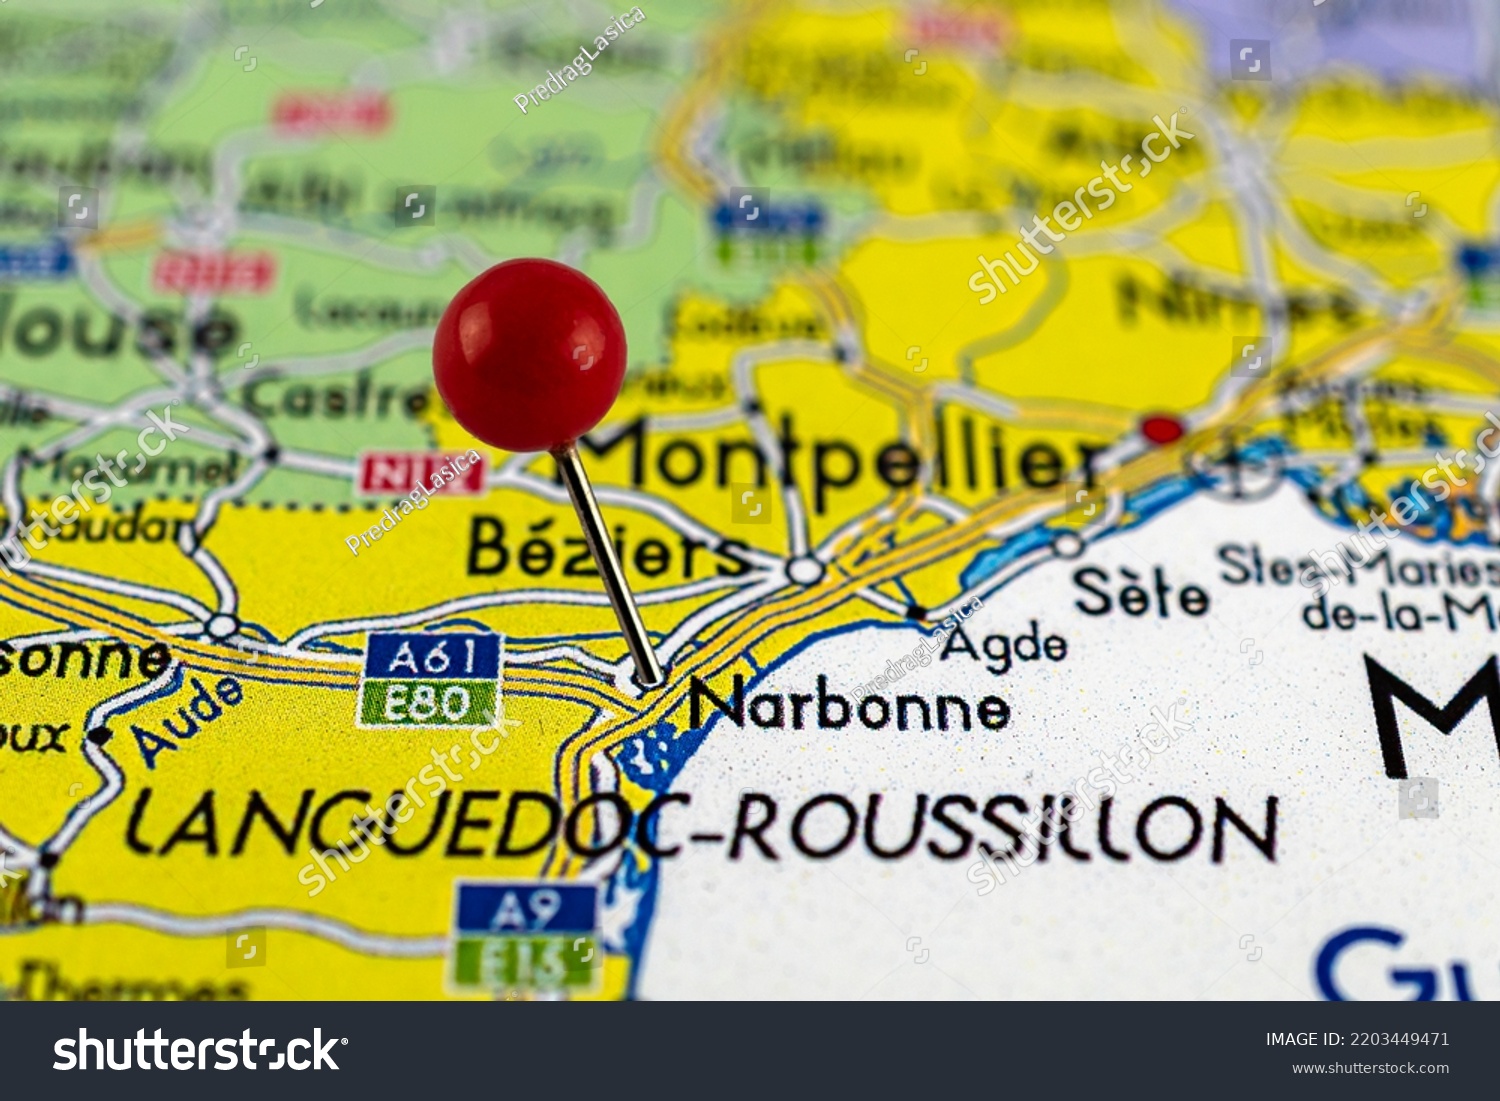 Stock Photo Narbonne Map Close Up Of Narbonne Map With Red Pin Map With Red Pin Point Of Narbonne In France 2203449471 